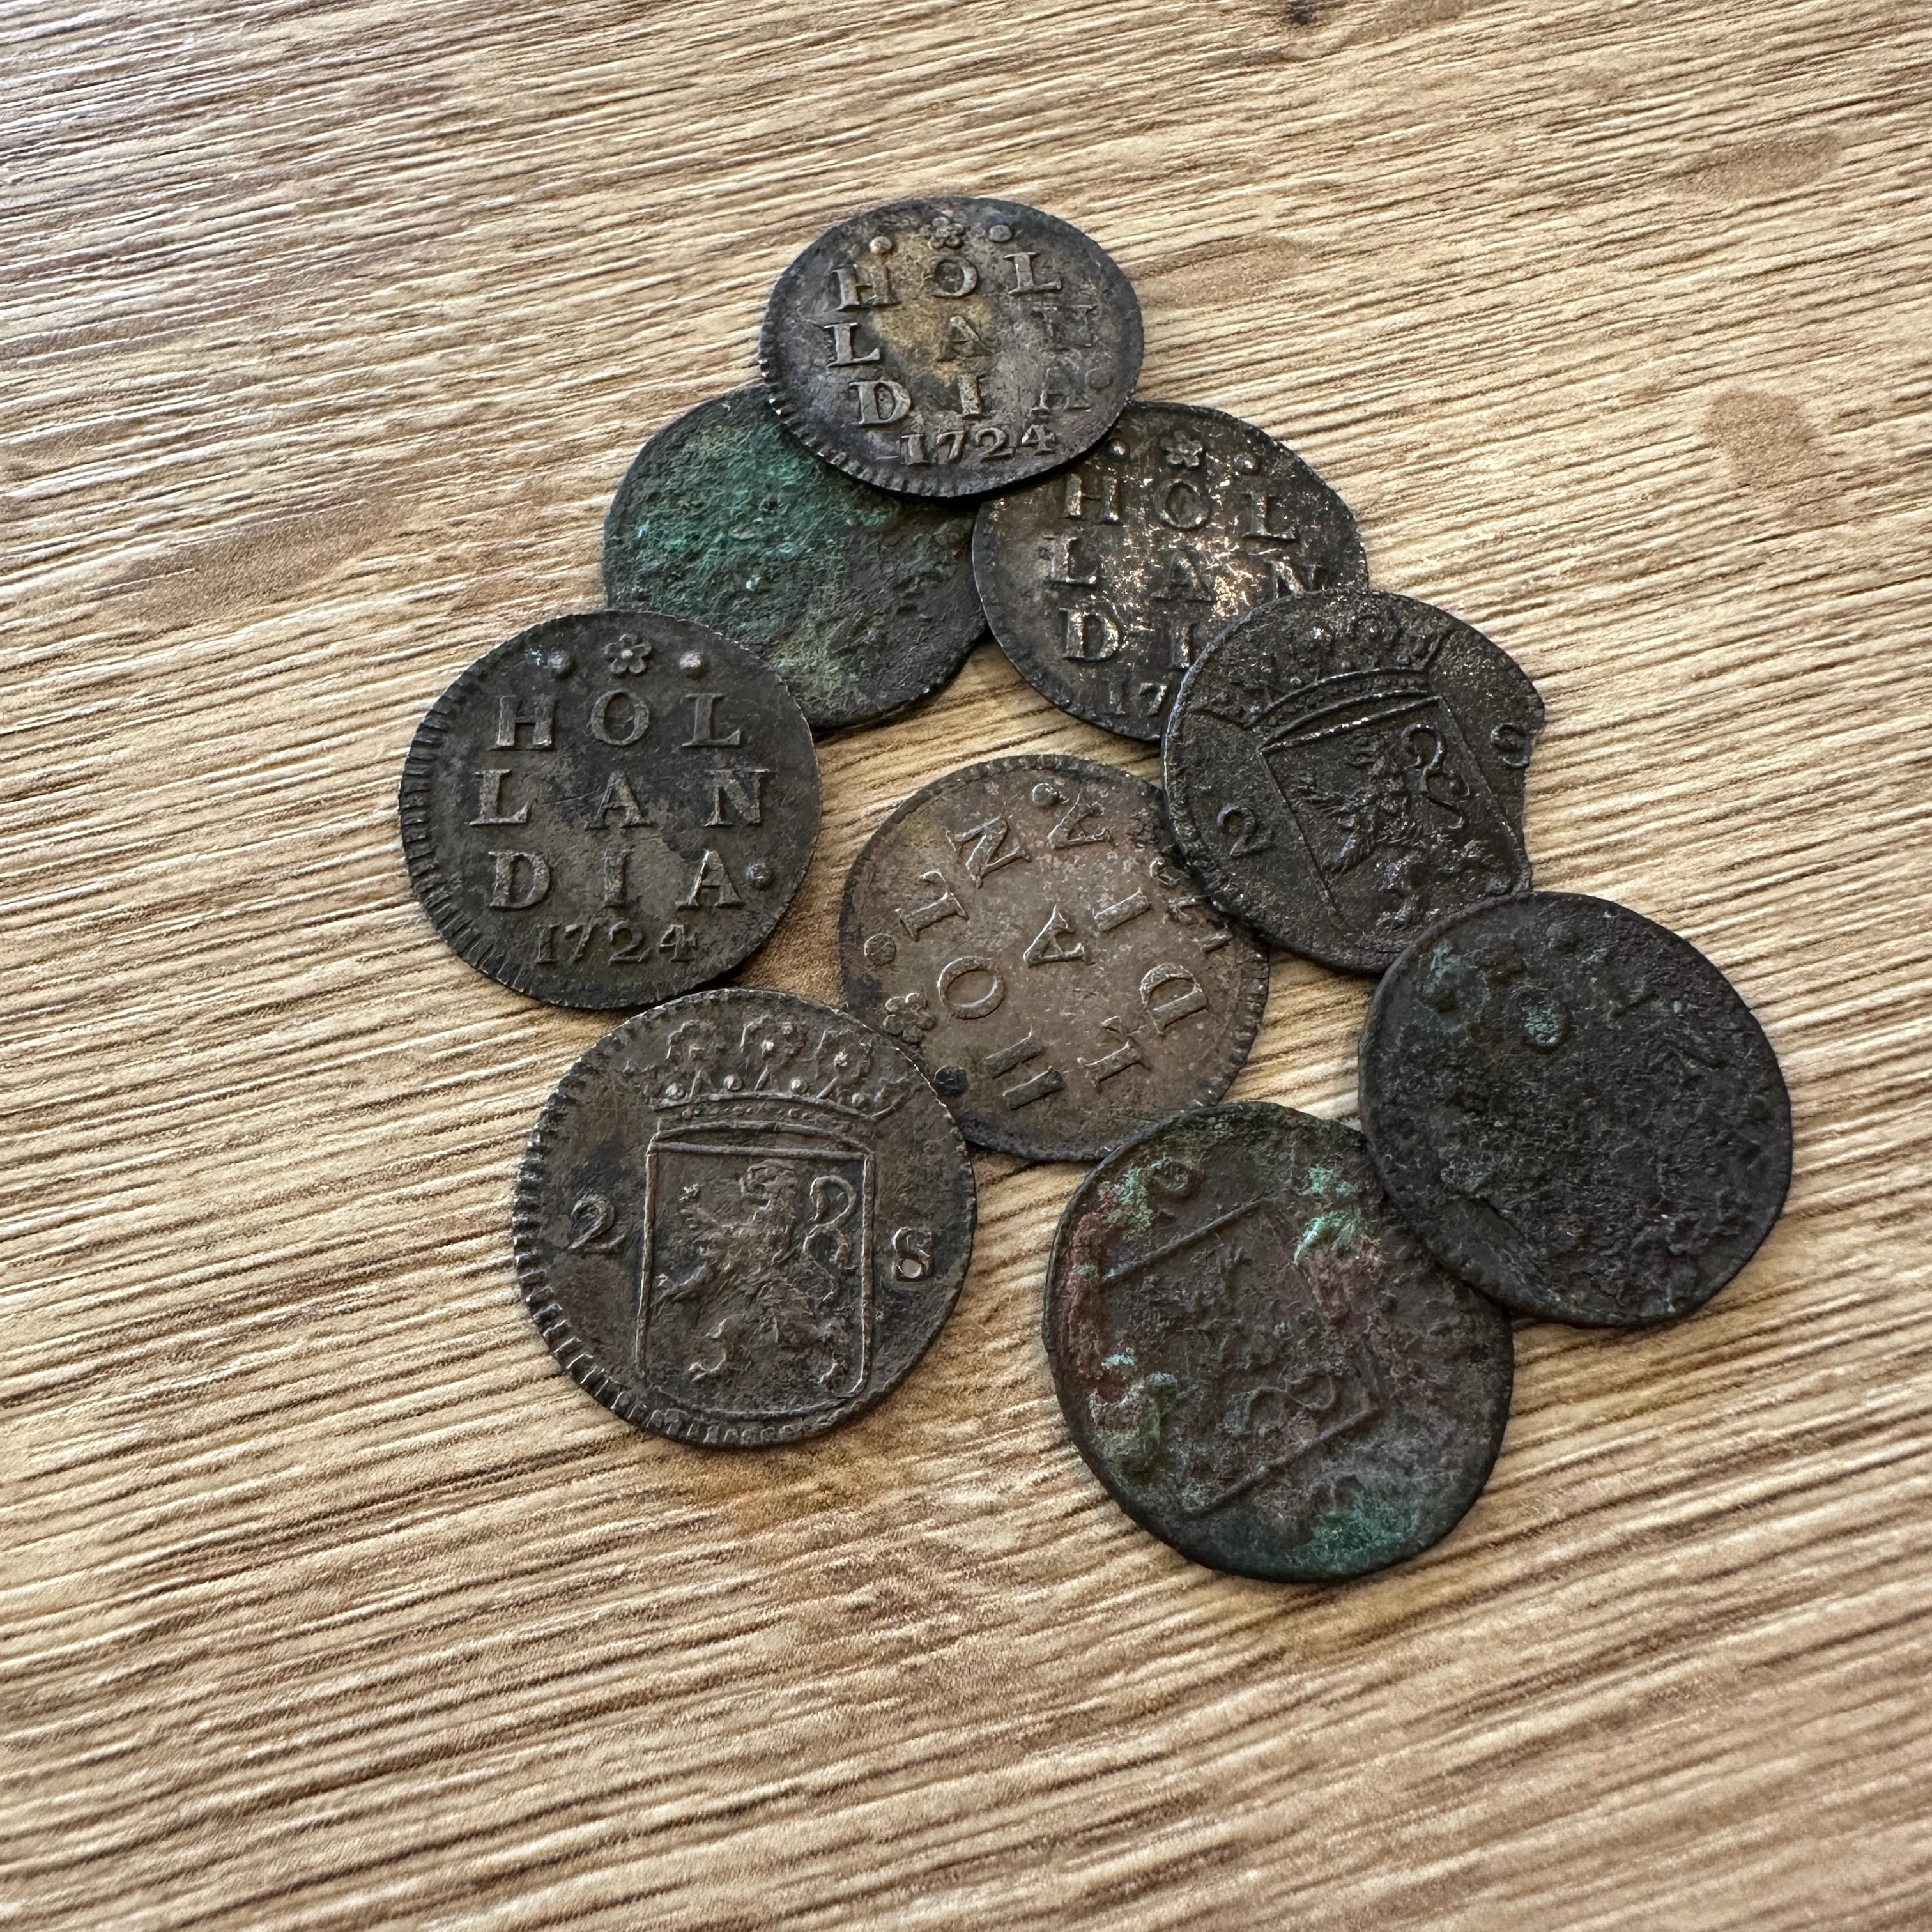 Early 18th Century Dutch VOC Silver Shipwreck Treasure Coins From The Akerendam Shipwreck 1724 For Sale